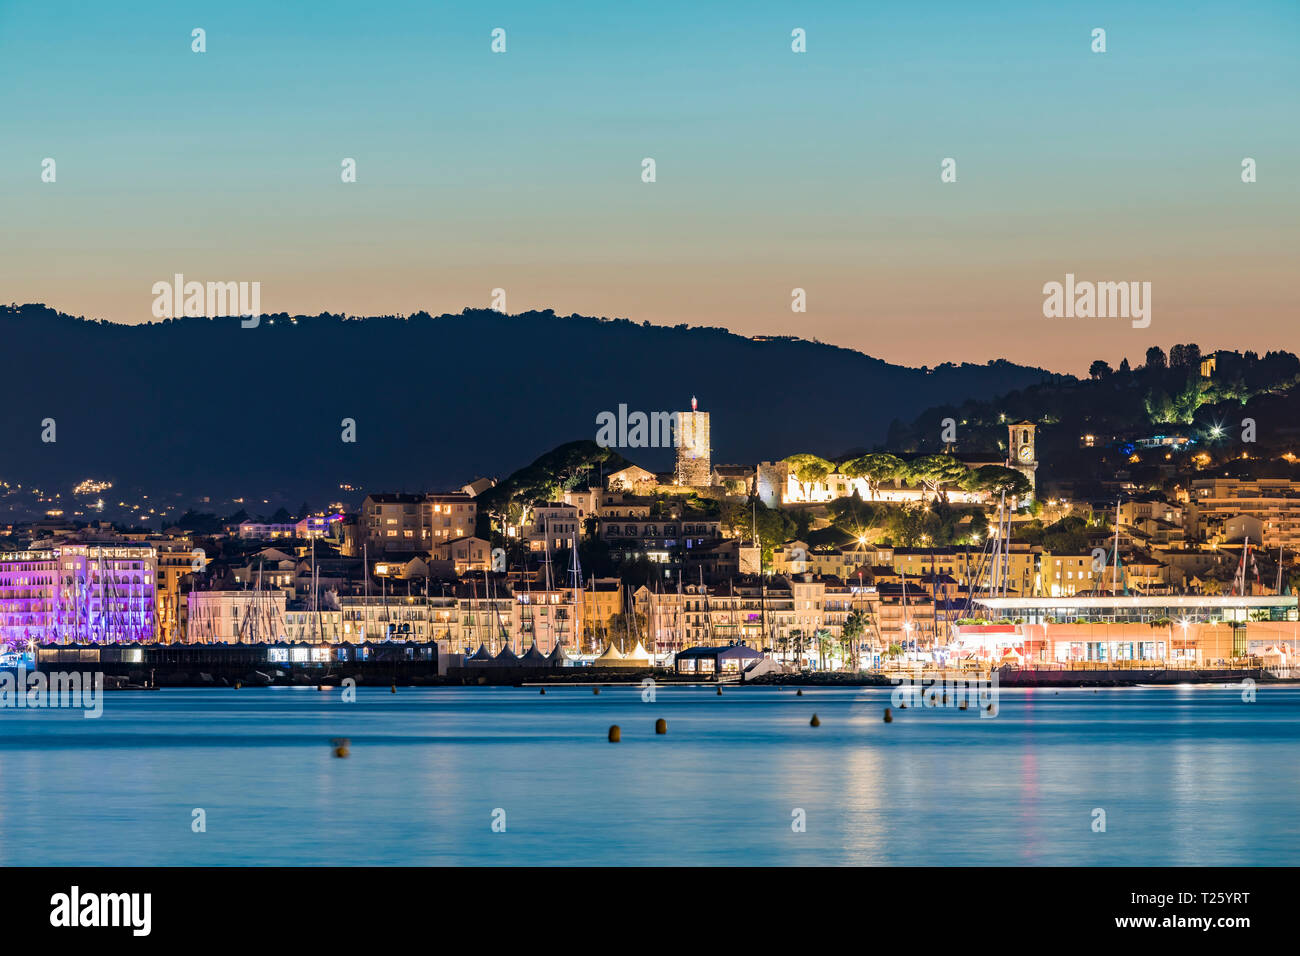 France, Provence-Alpes-Cote d'Azur, Cannes, View of Le Suquet, Old town with Castle and Chapelle Sainte-Anne in the evening Stock Photo